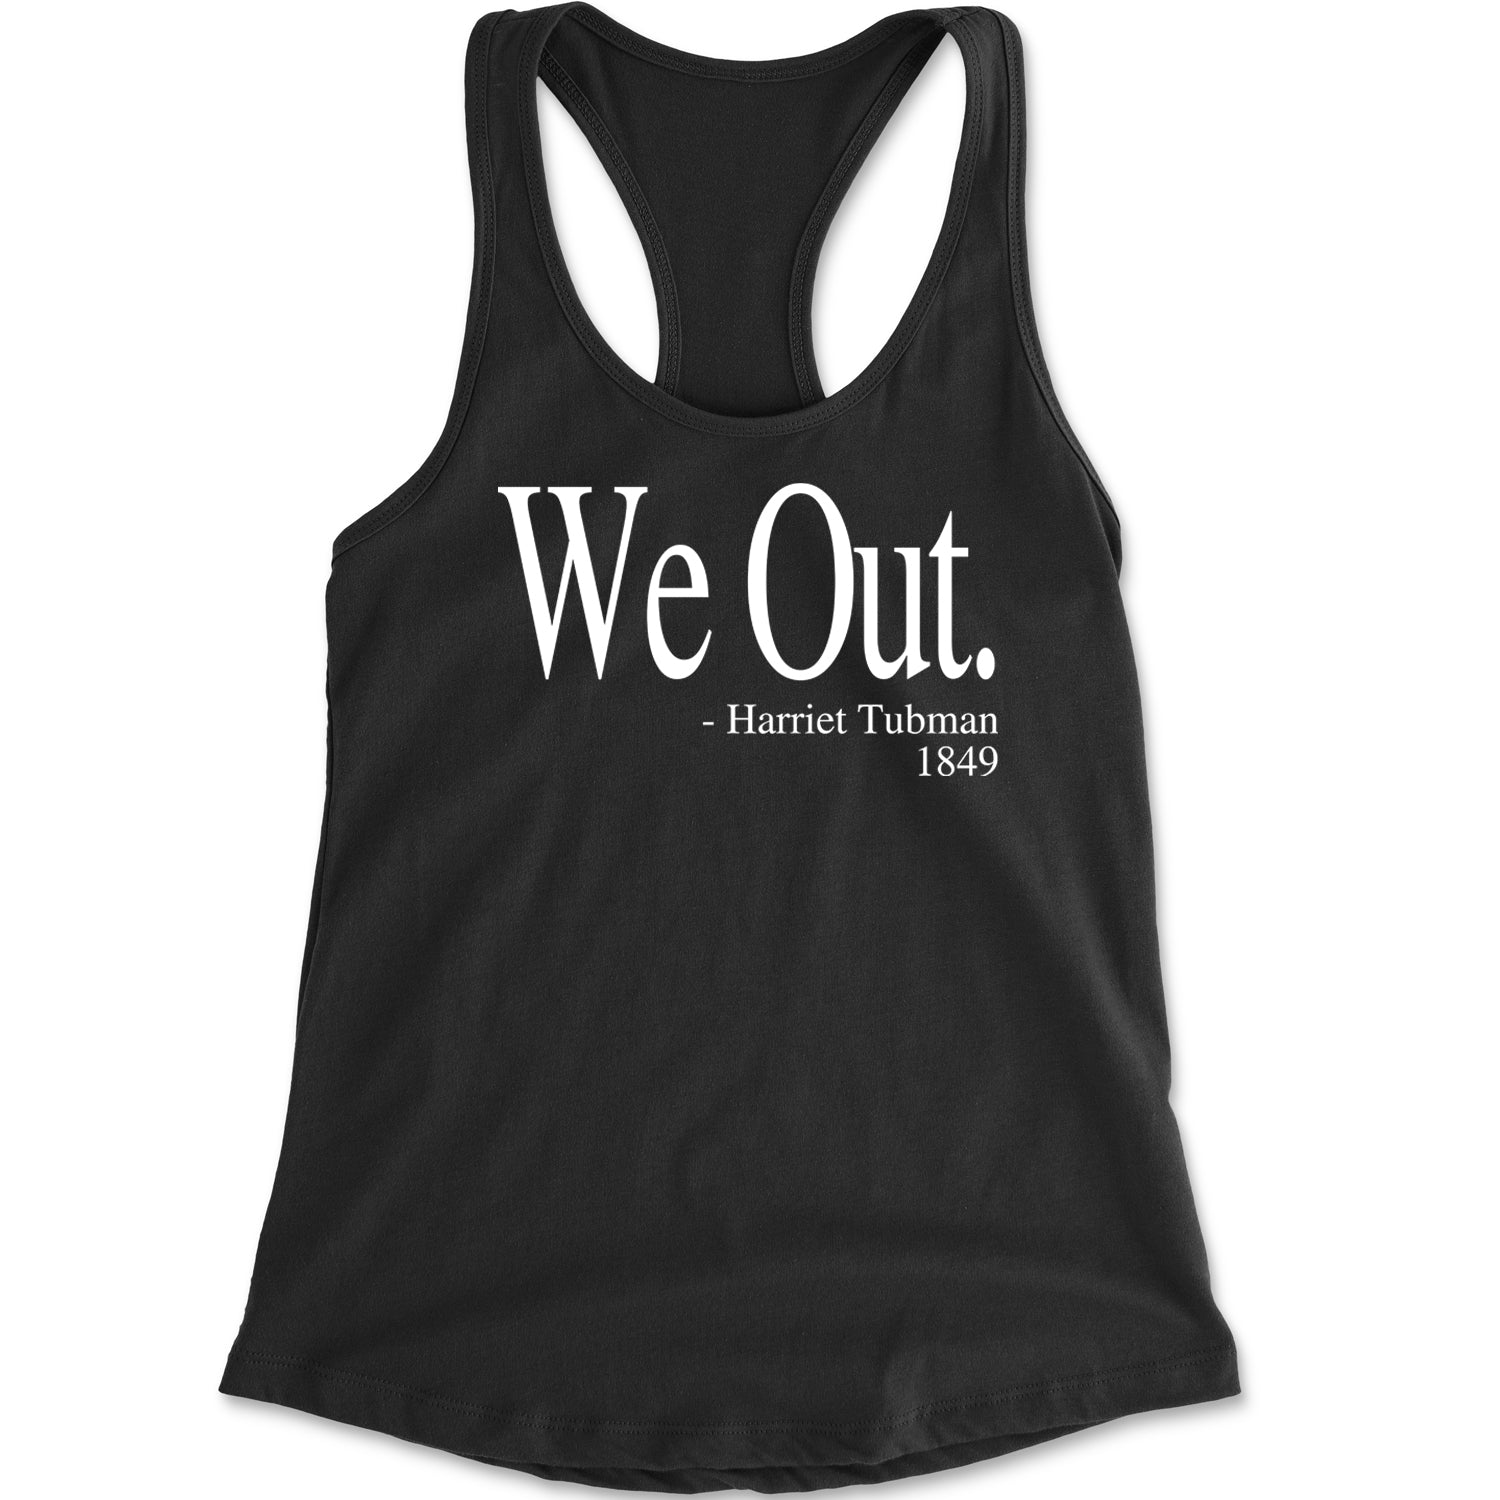 We Out Harriet Tubman Funny Quote Racerback Tank Top for Women